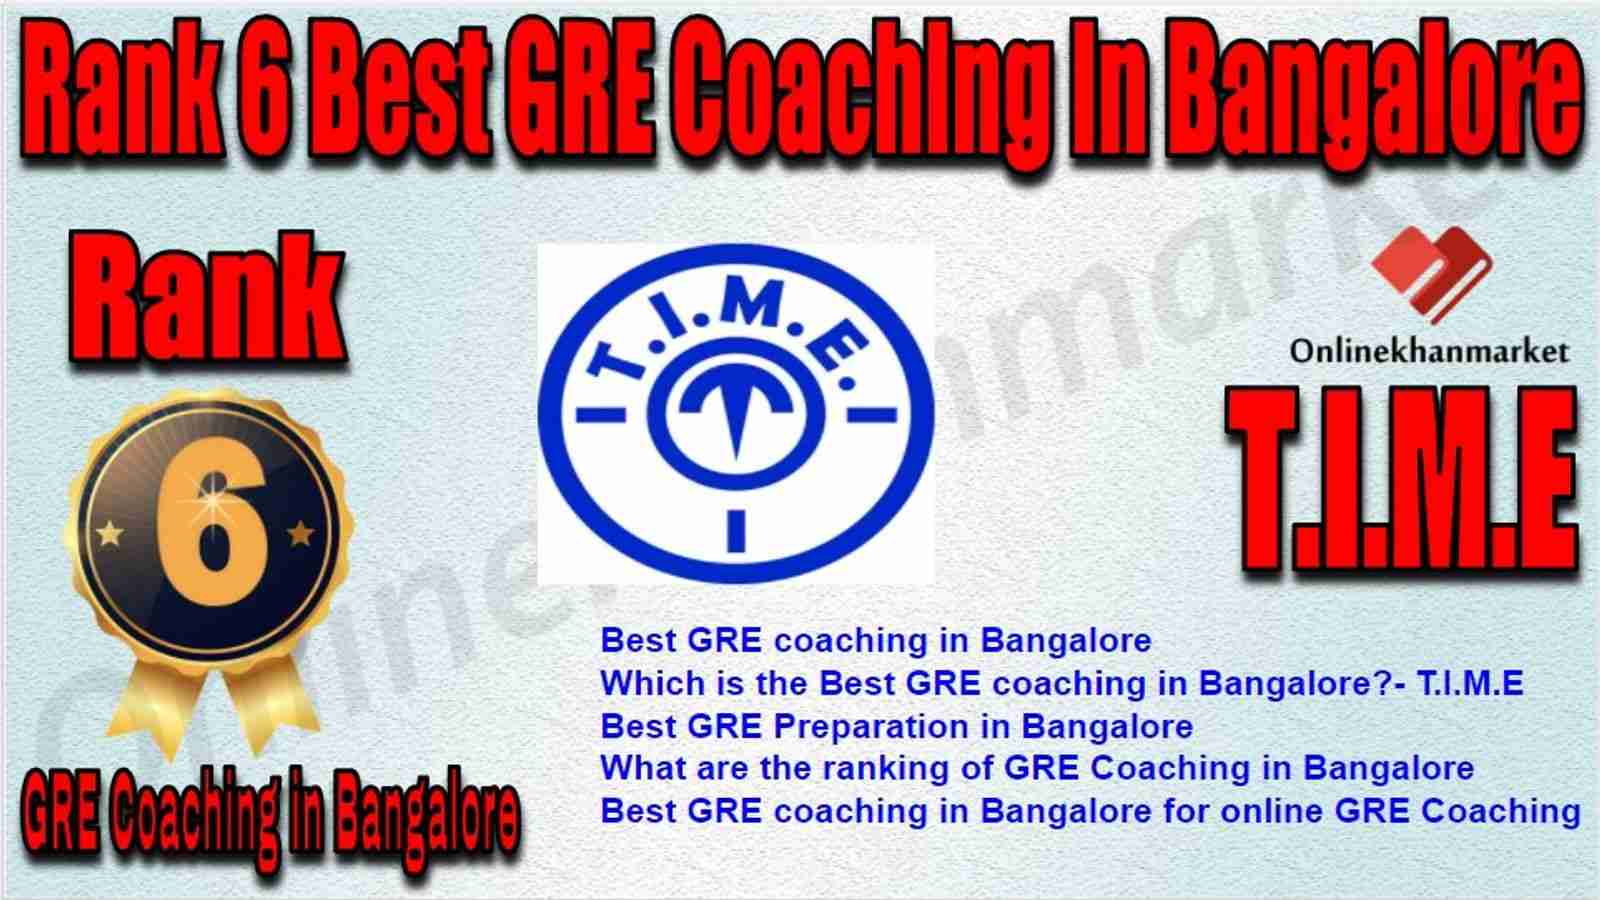 Rank 6 Best GRE Coaching in Bangalore